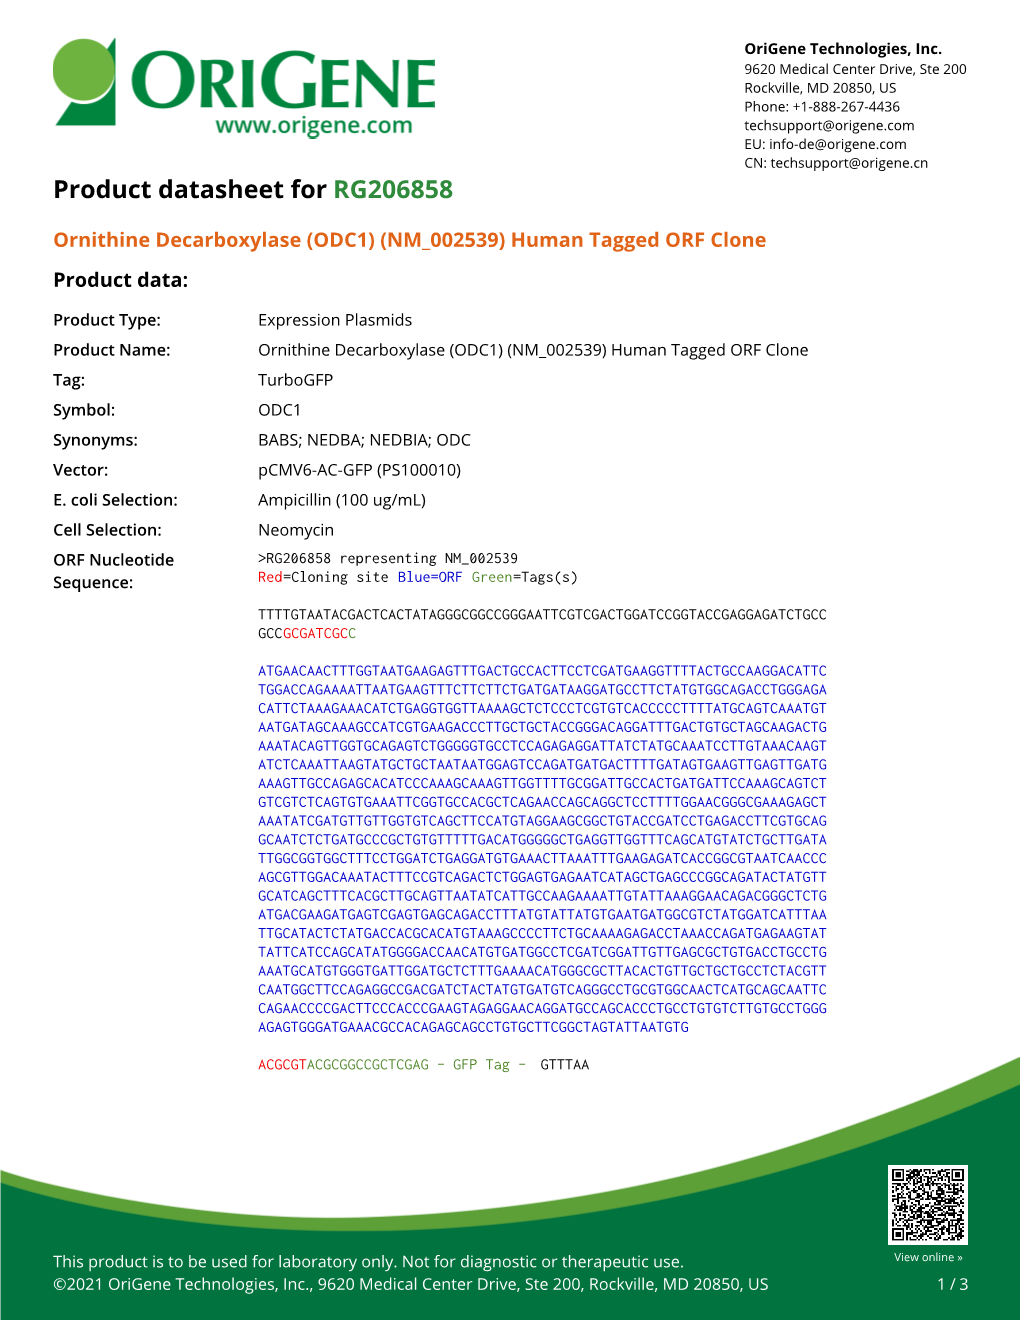 Ornithine Decarboxylase (ODC1) (NM 002539) Human Tagged ORF Clone Product Data